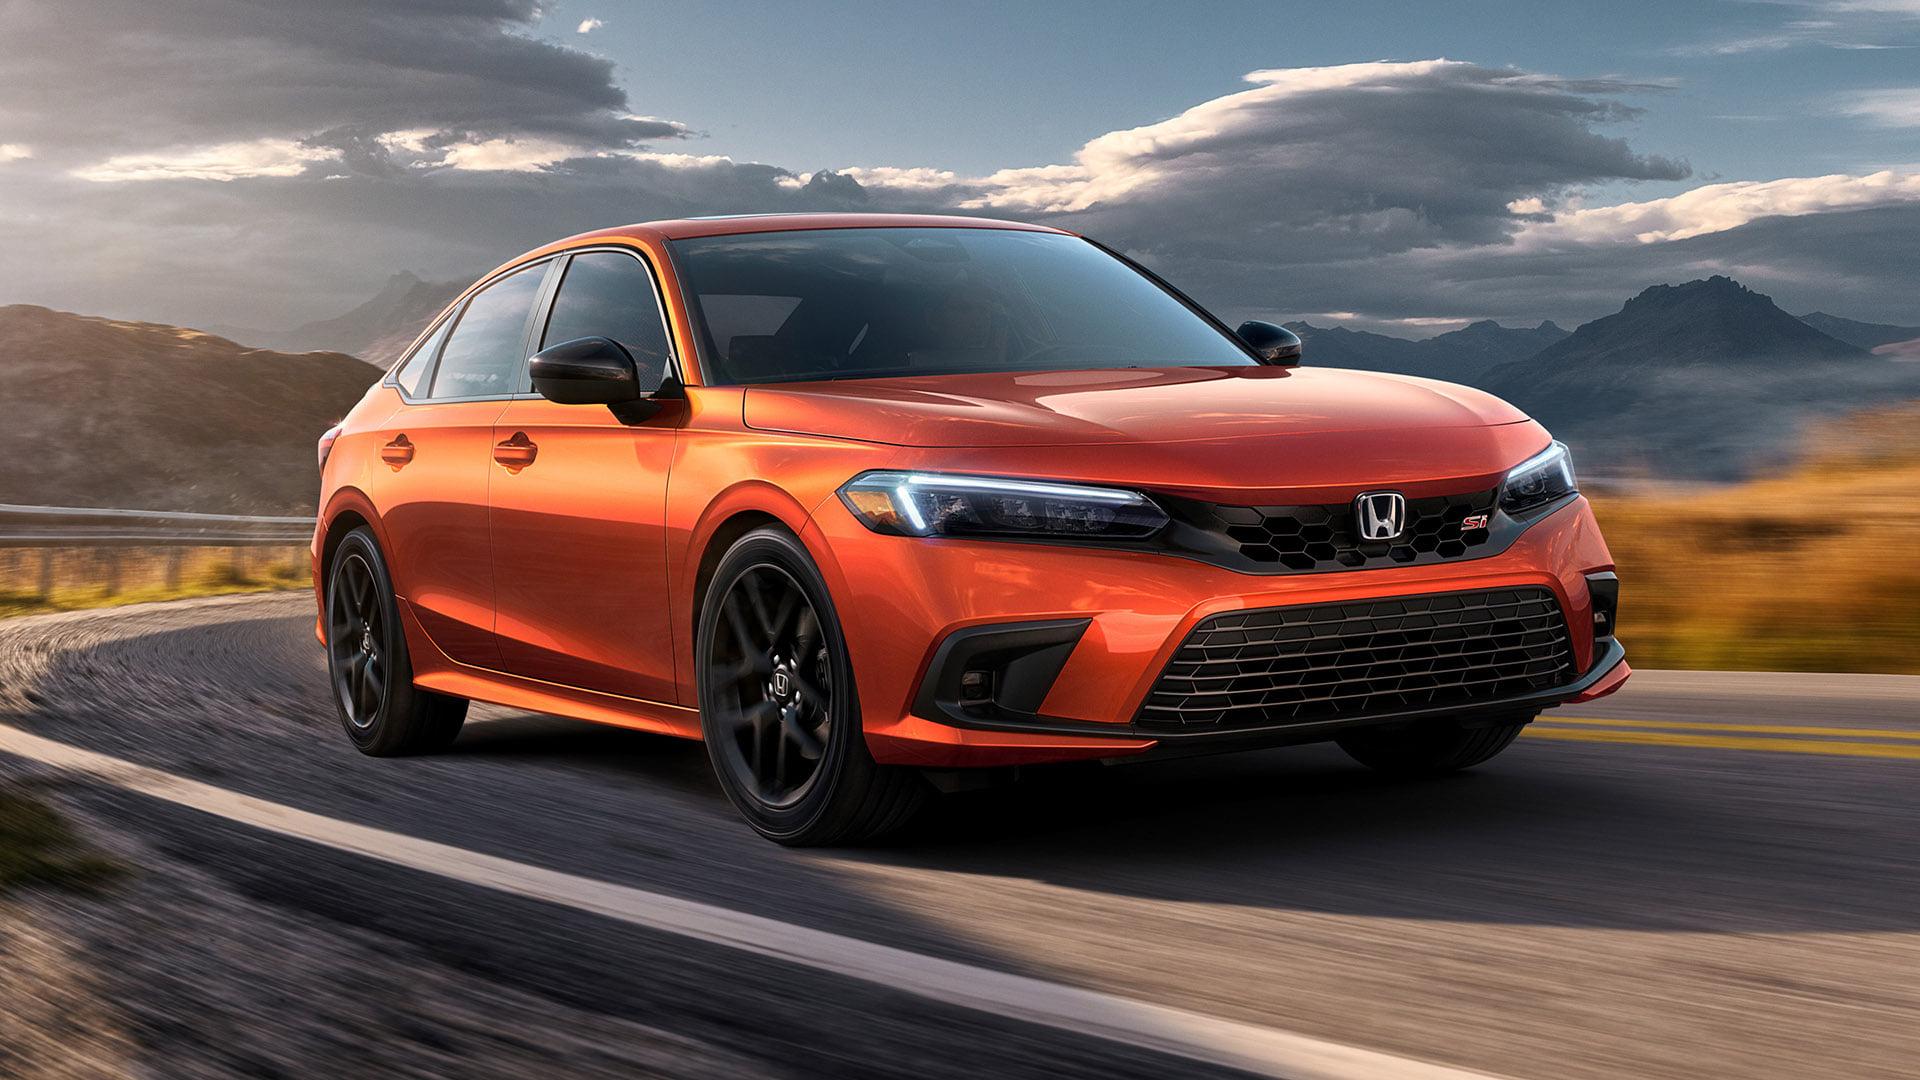 2020 Honda Civic Si Small Changes to a Great Car